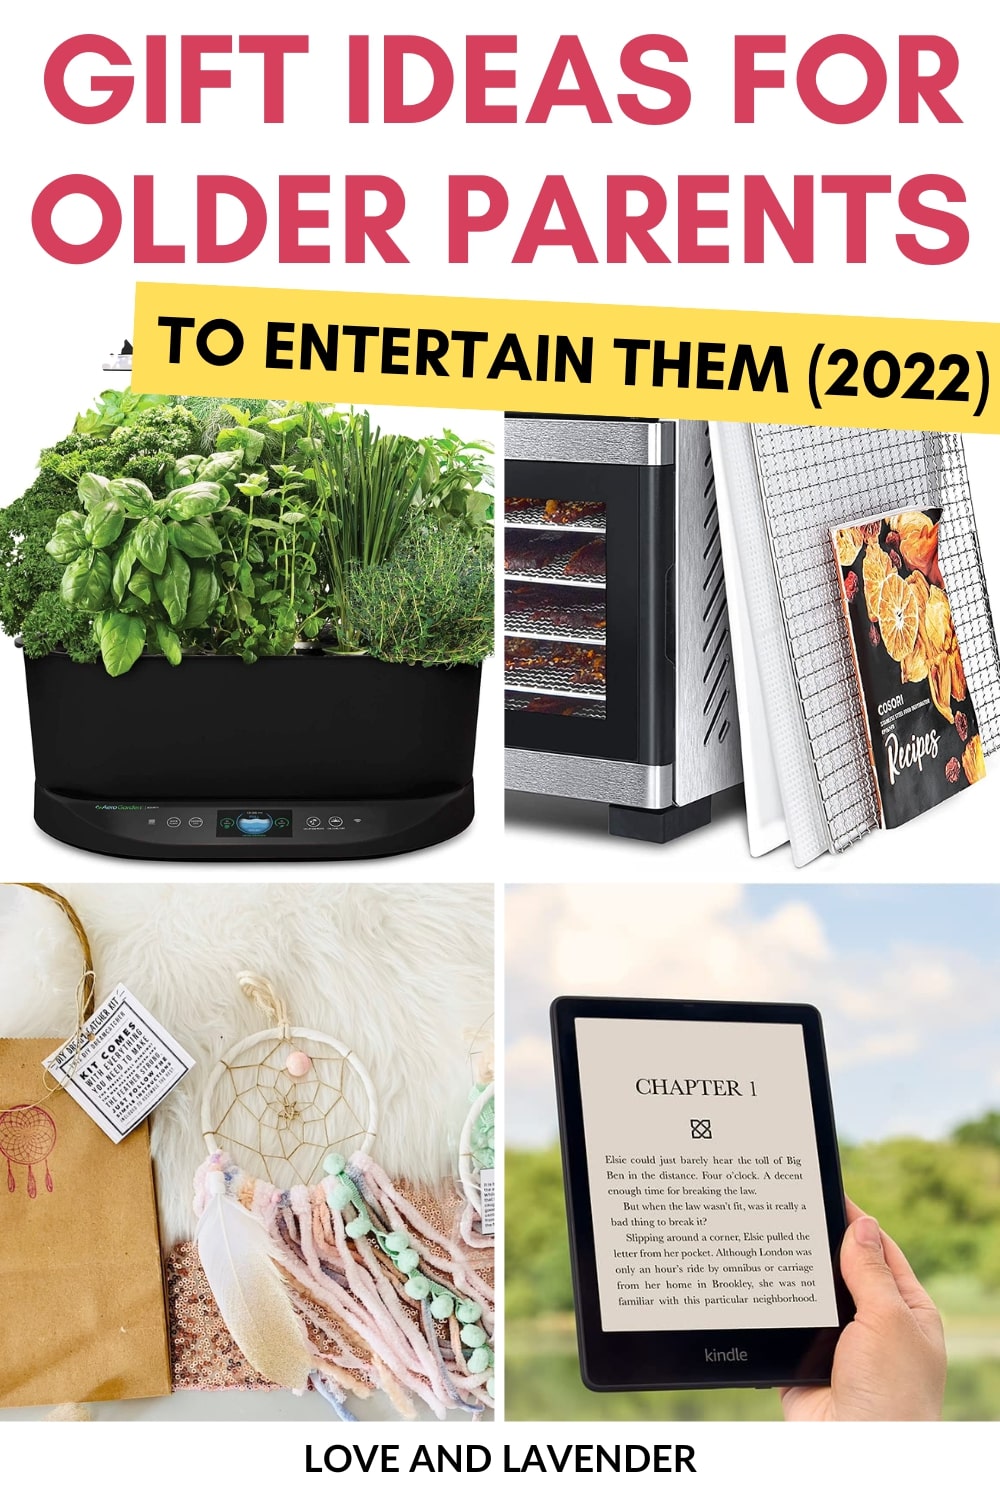 23 Gift Ideas for Older Parents to Entertain Them (2022)